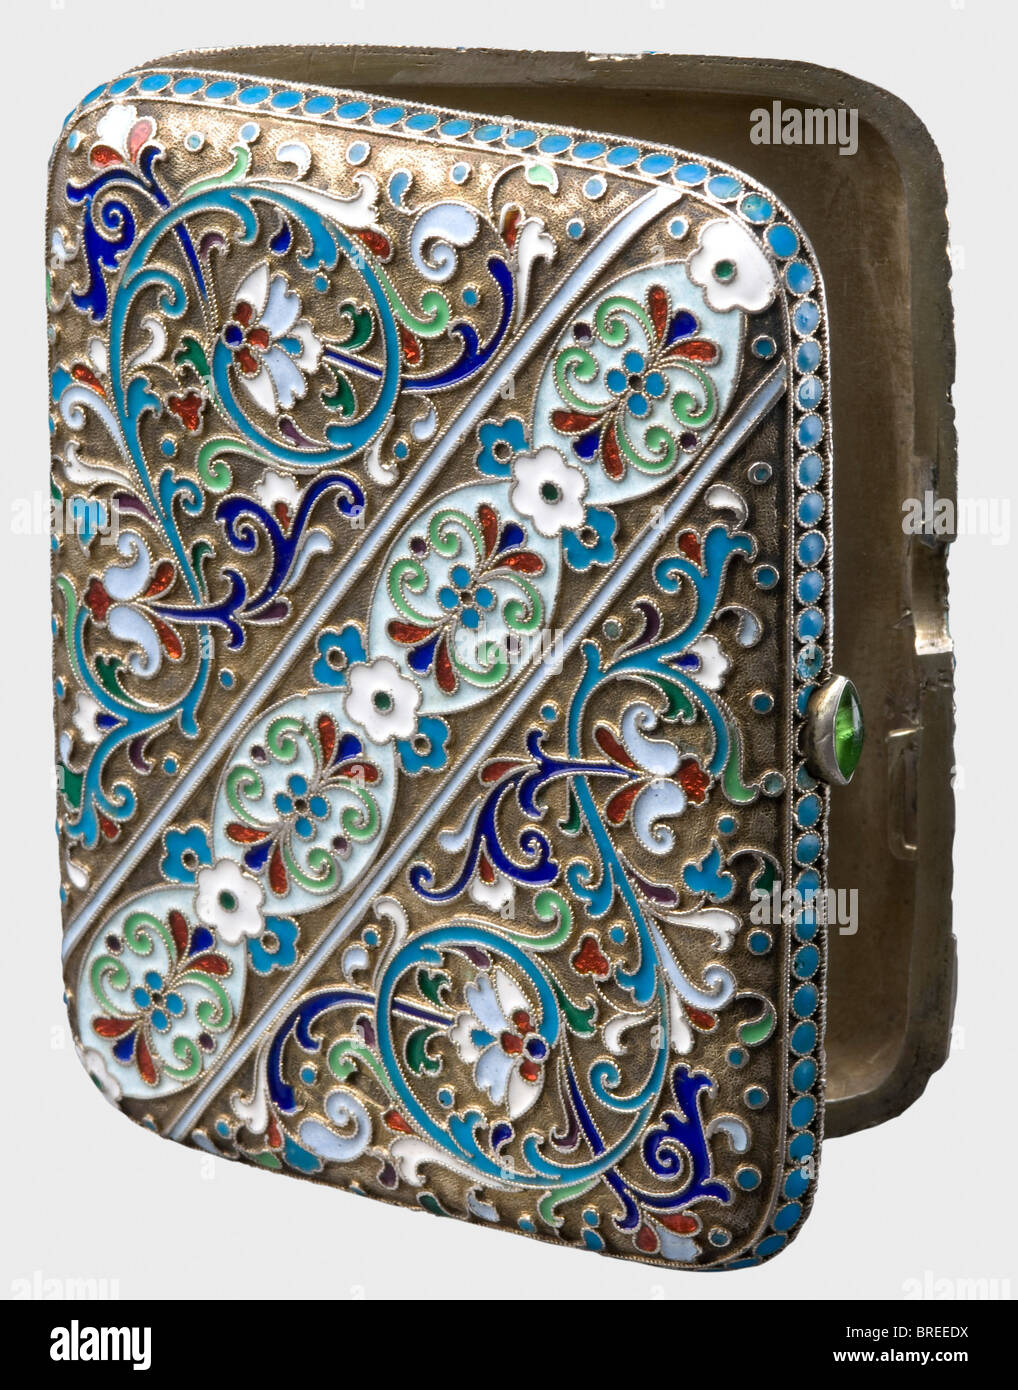 A cloisonné cigarette case, unknown master 'NJ', Moscow, circa 1910 Gilt silver, fine floral enamel work. Cyrillic master's mark, 'NJ' and the Moscow hallmark for '84' zolotniki. Dimensions 9.6 x 7.5 cm. Weight 154 g. historic, historical, 1910s, 20th century, object, objects, stills, clipping, clippings, cut out, cut-out, cut-outs, fine arts, art, art object, art objects, artful, precious, collectible, collector's item, collectibles, collector's items, rarity, rarities, Stock Photo